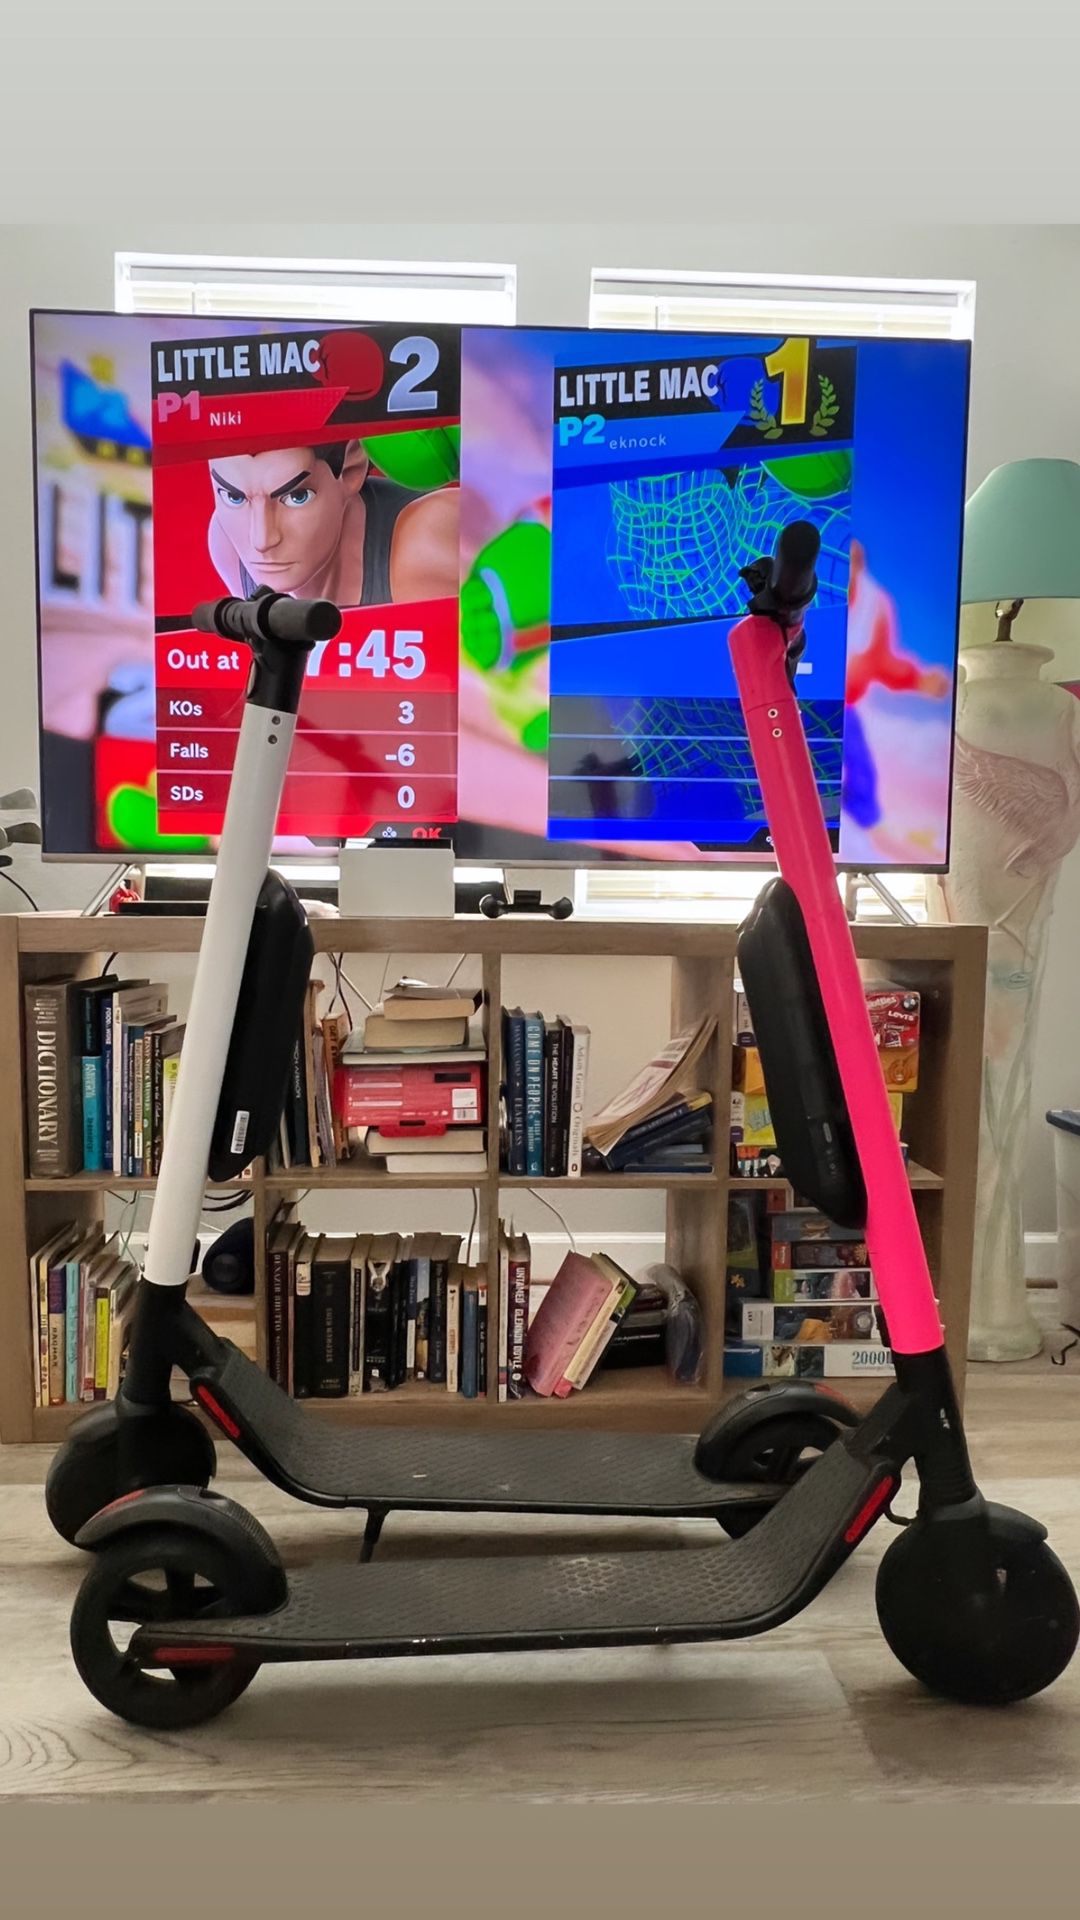 2  Electric Scooters Speed Up To 33 Mph Price Negotiable 